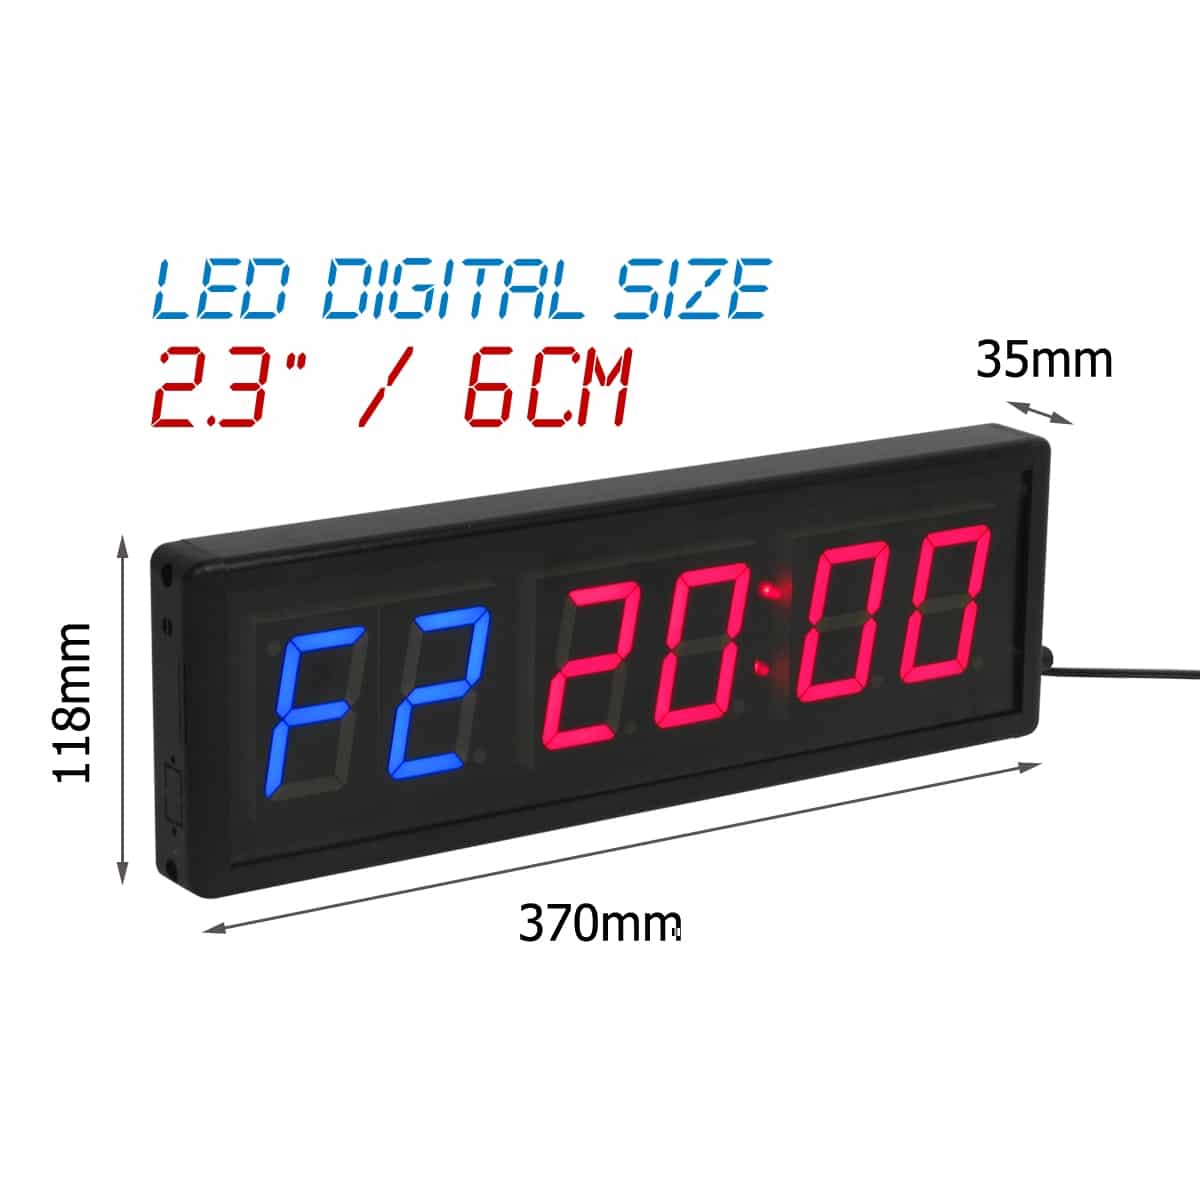 4 Digits Height Pellor Fitness Training Gym Timer Indoor Interval Timer Clock with Remote Control for Crossfit EMOM MMA Tabata 